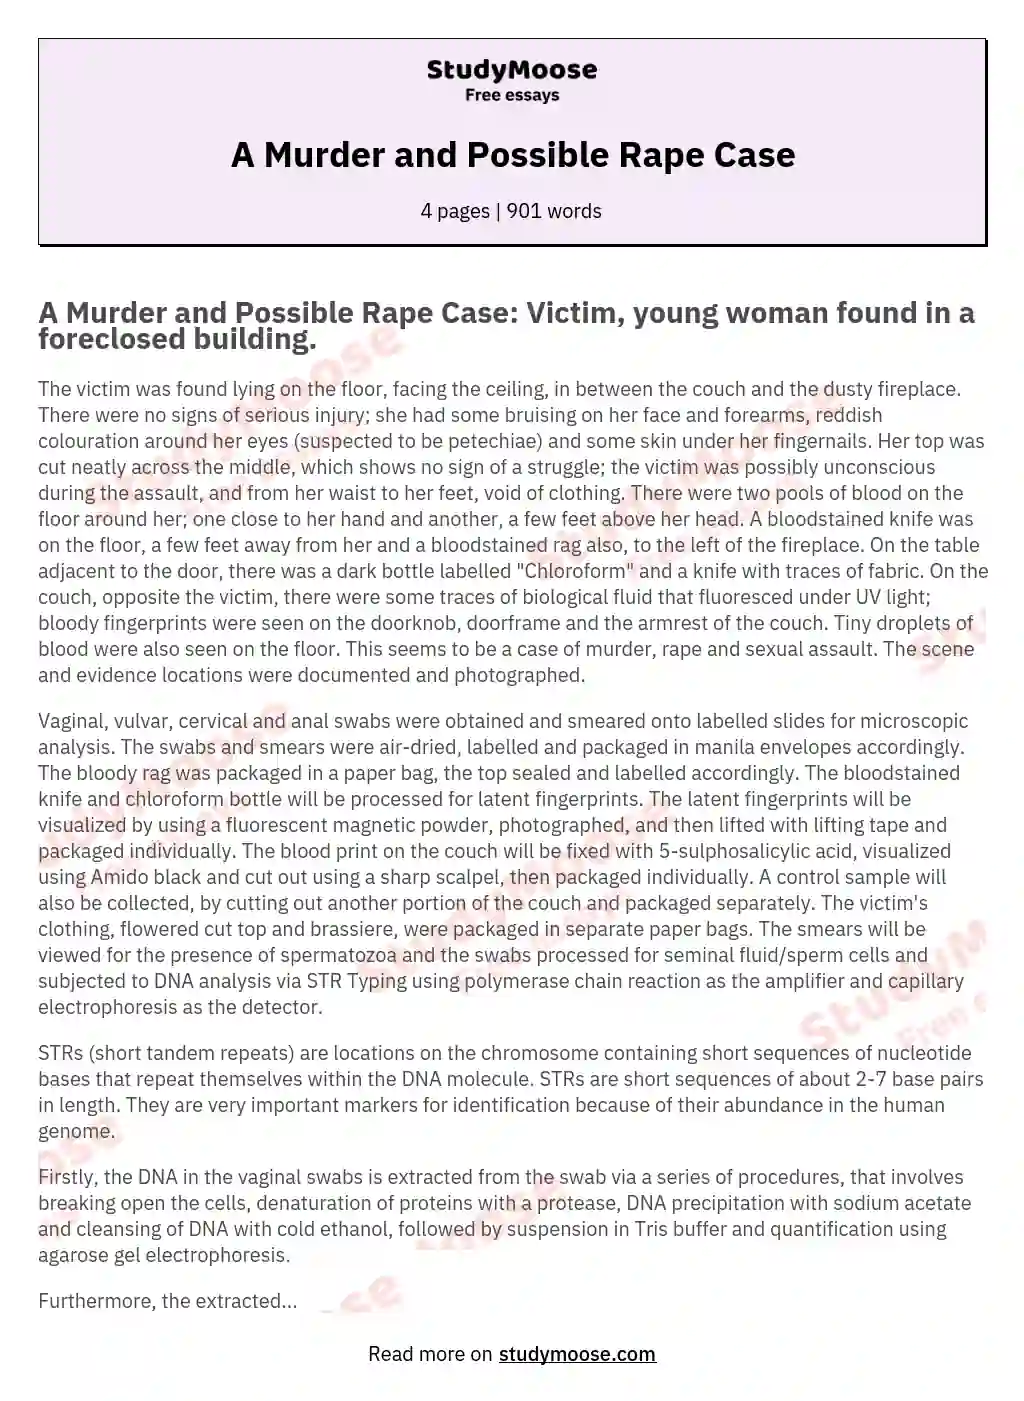 A Murder and Possible Rape Case essay